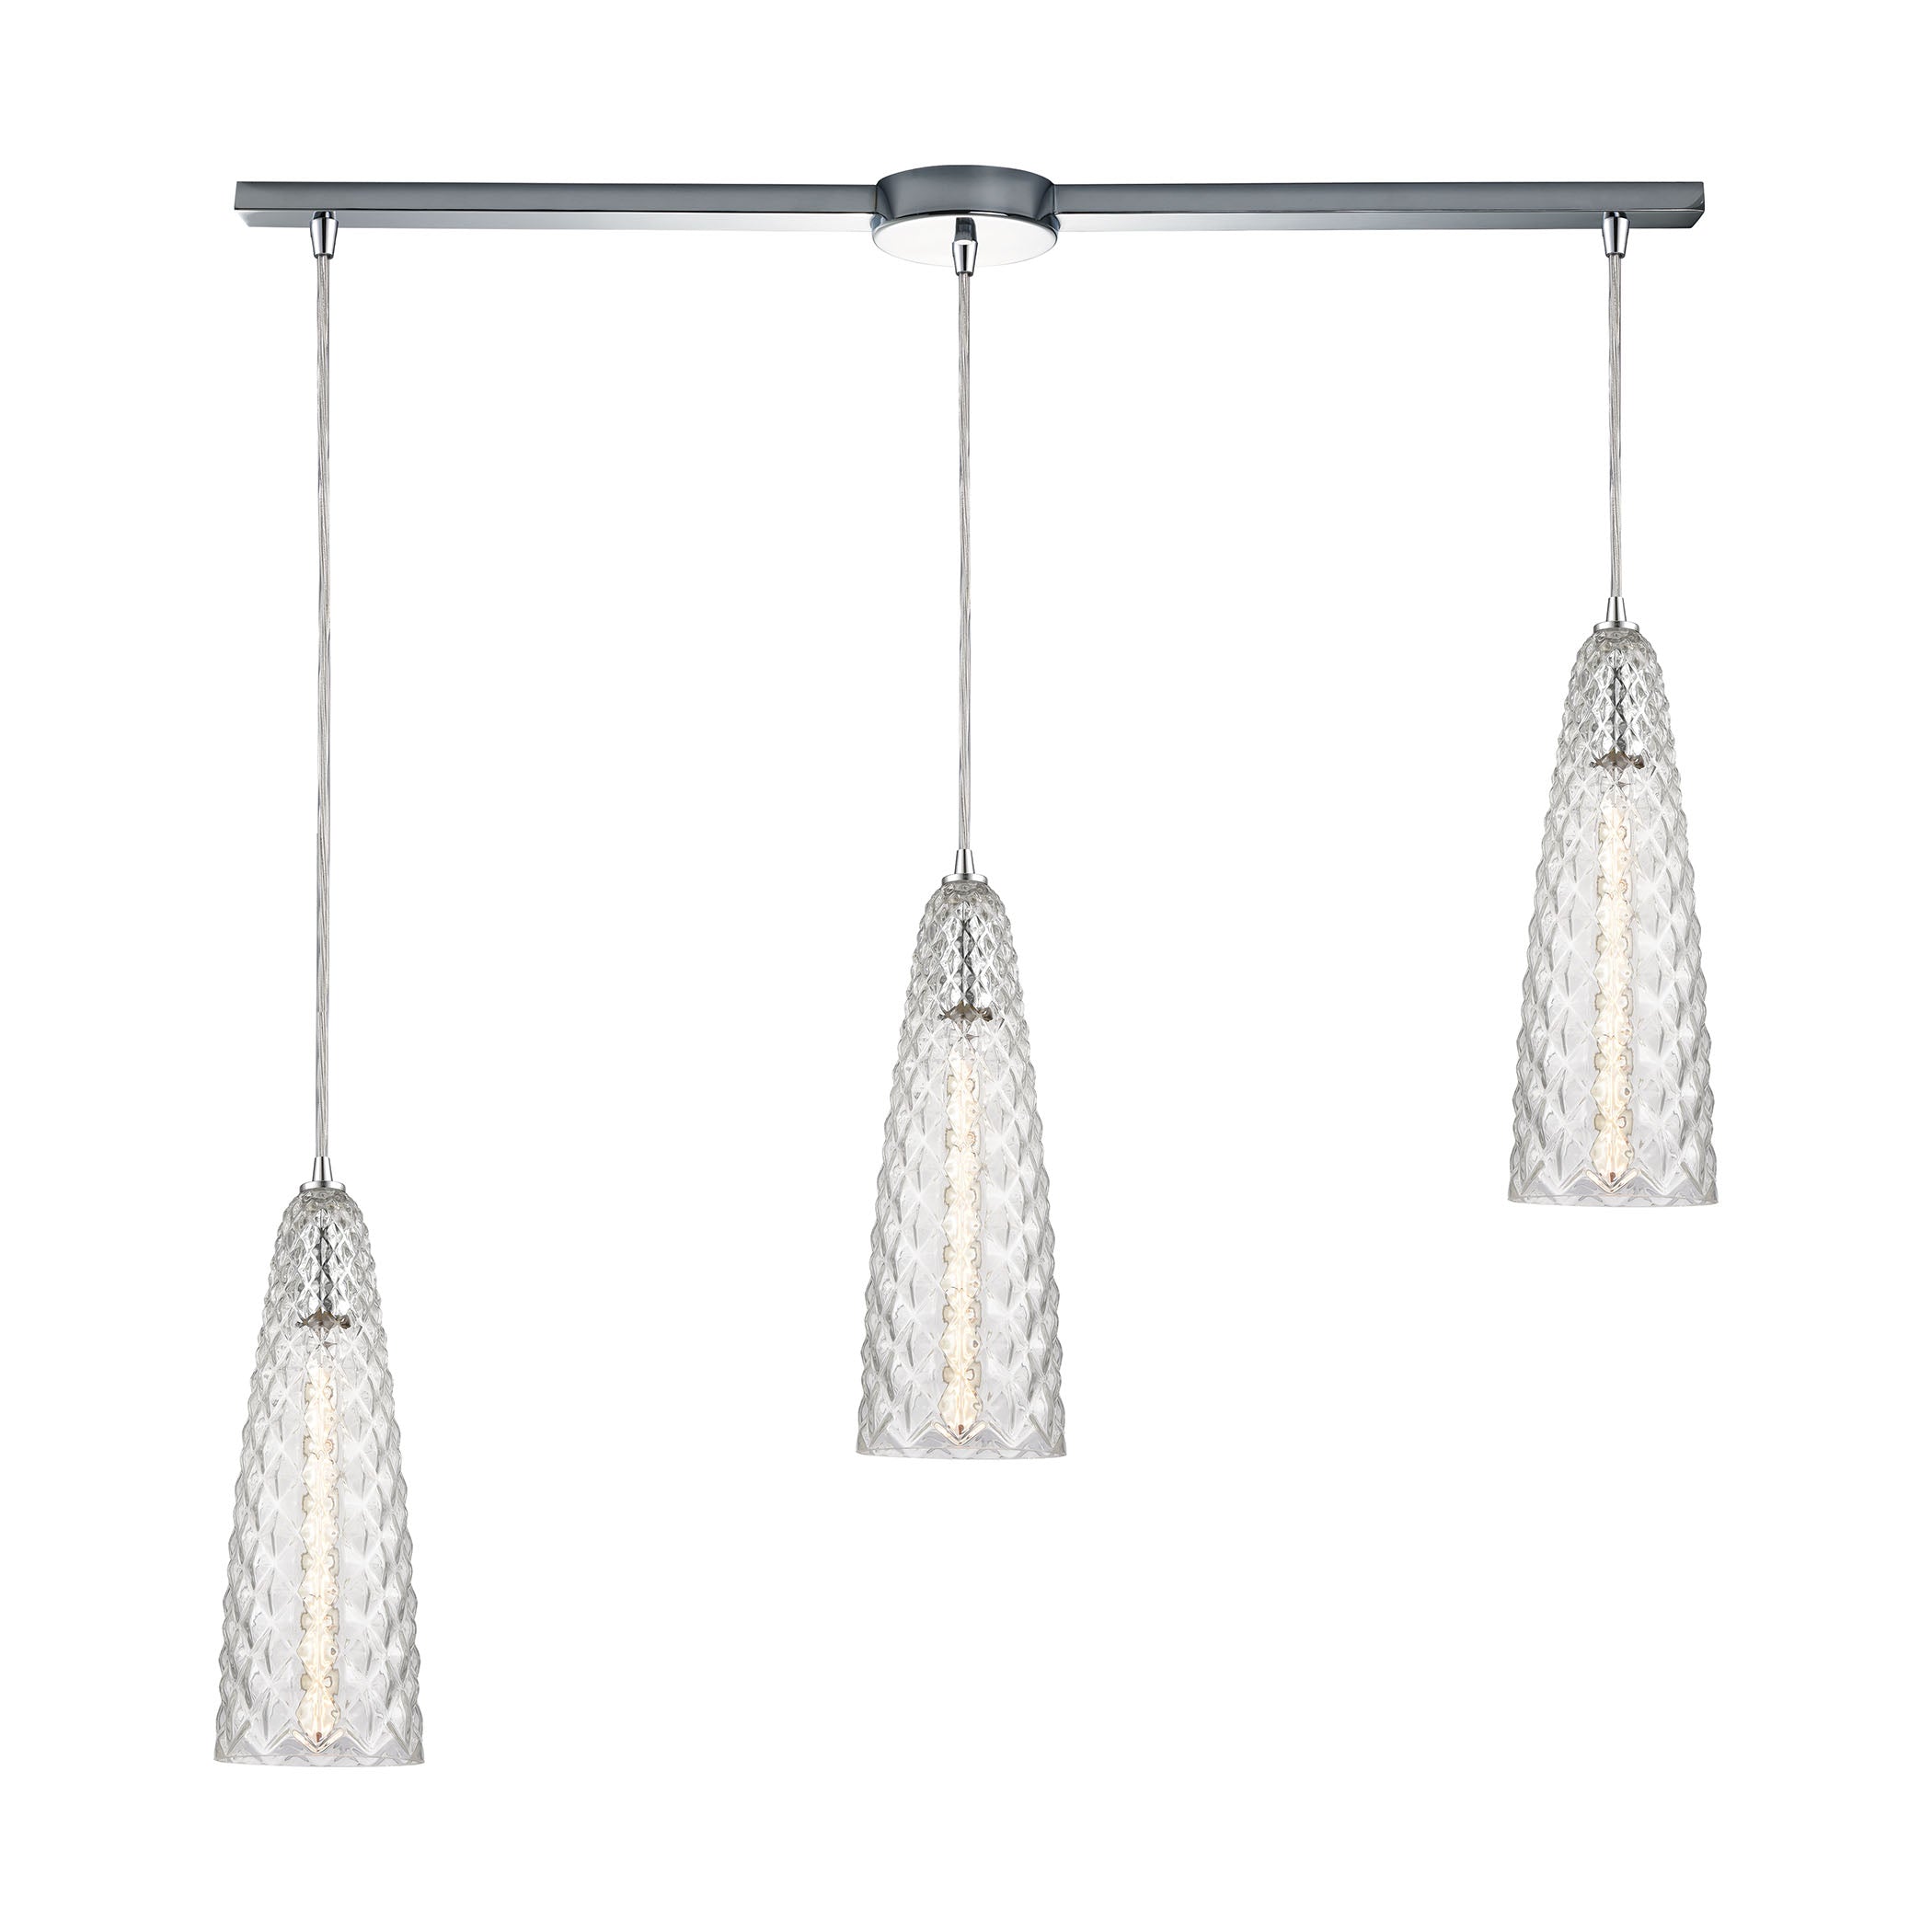 ELK Lighting 21167/3L Glitzy 3-Light Linear Mini Pendant Fixture in Polished Chrome with Clear Glass